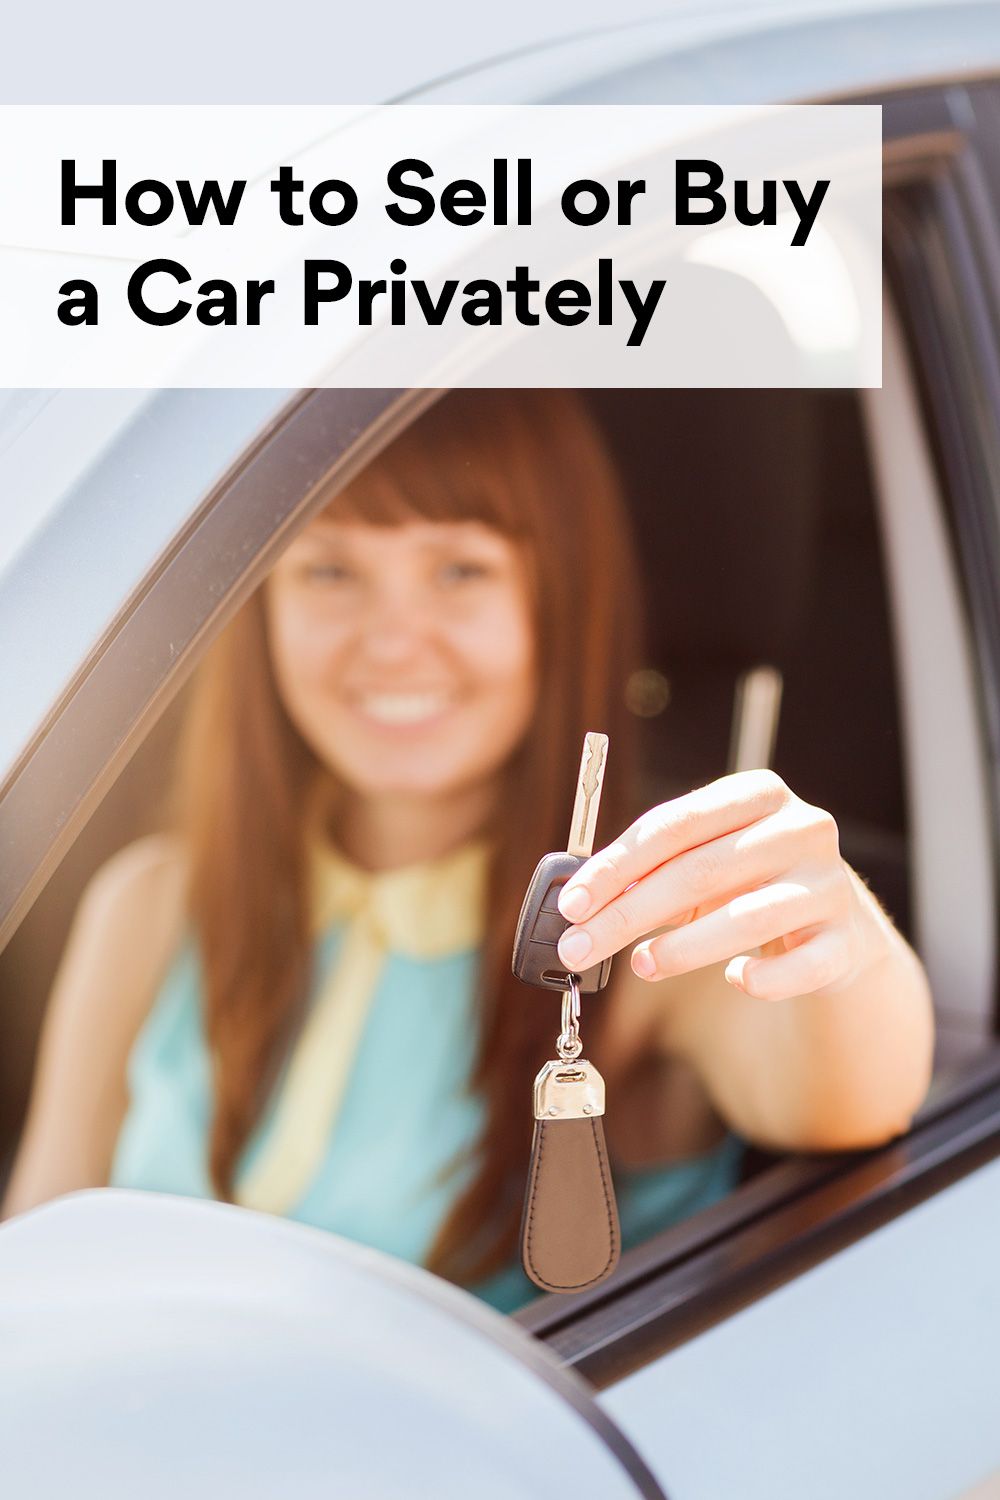 How to Sell or Buy a Used Car Privately